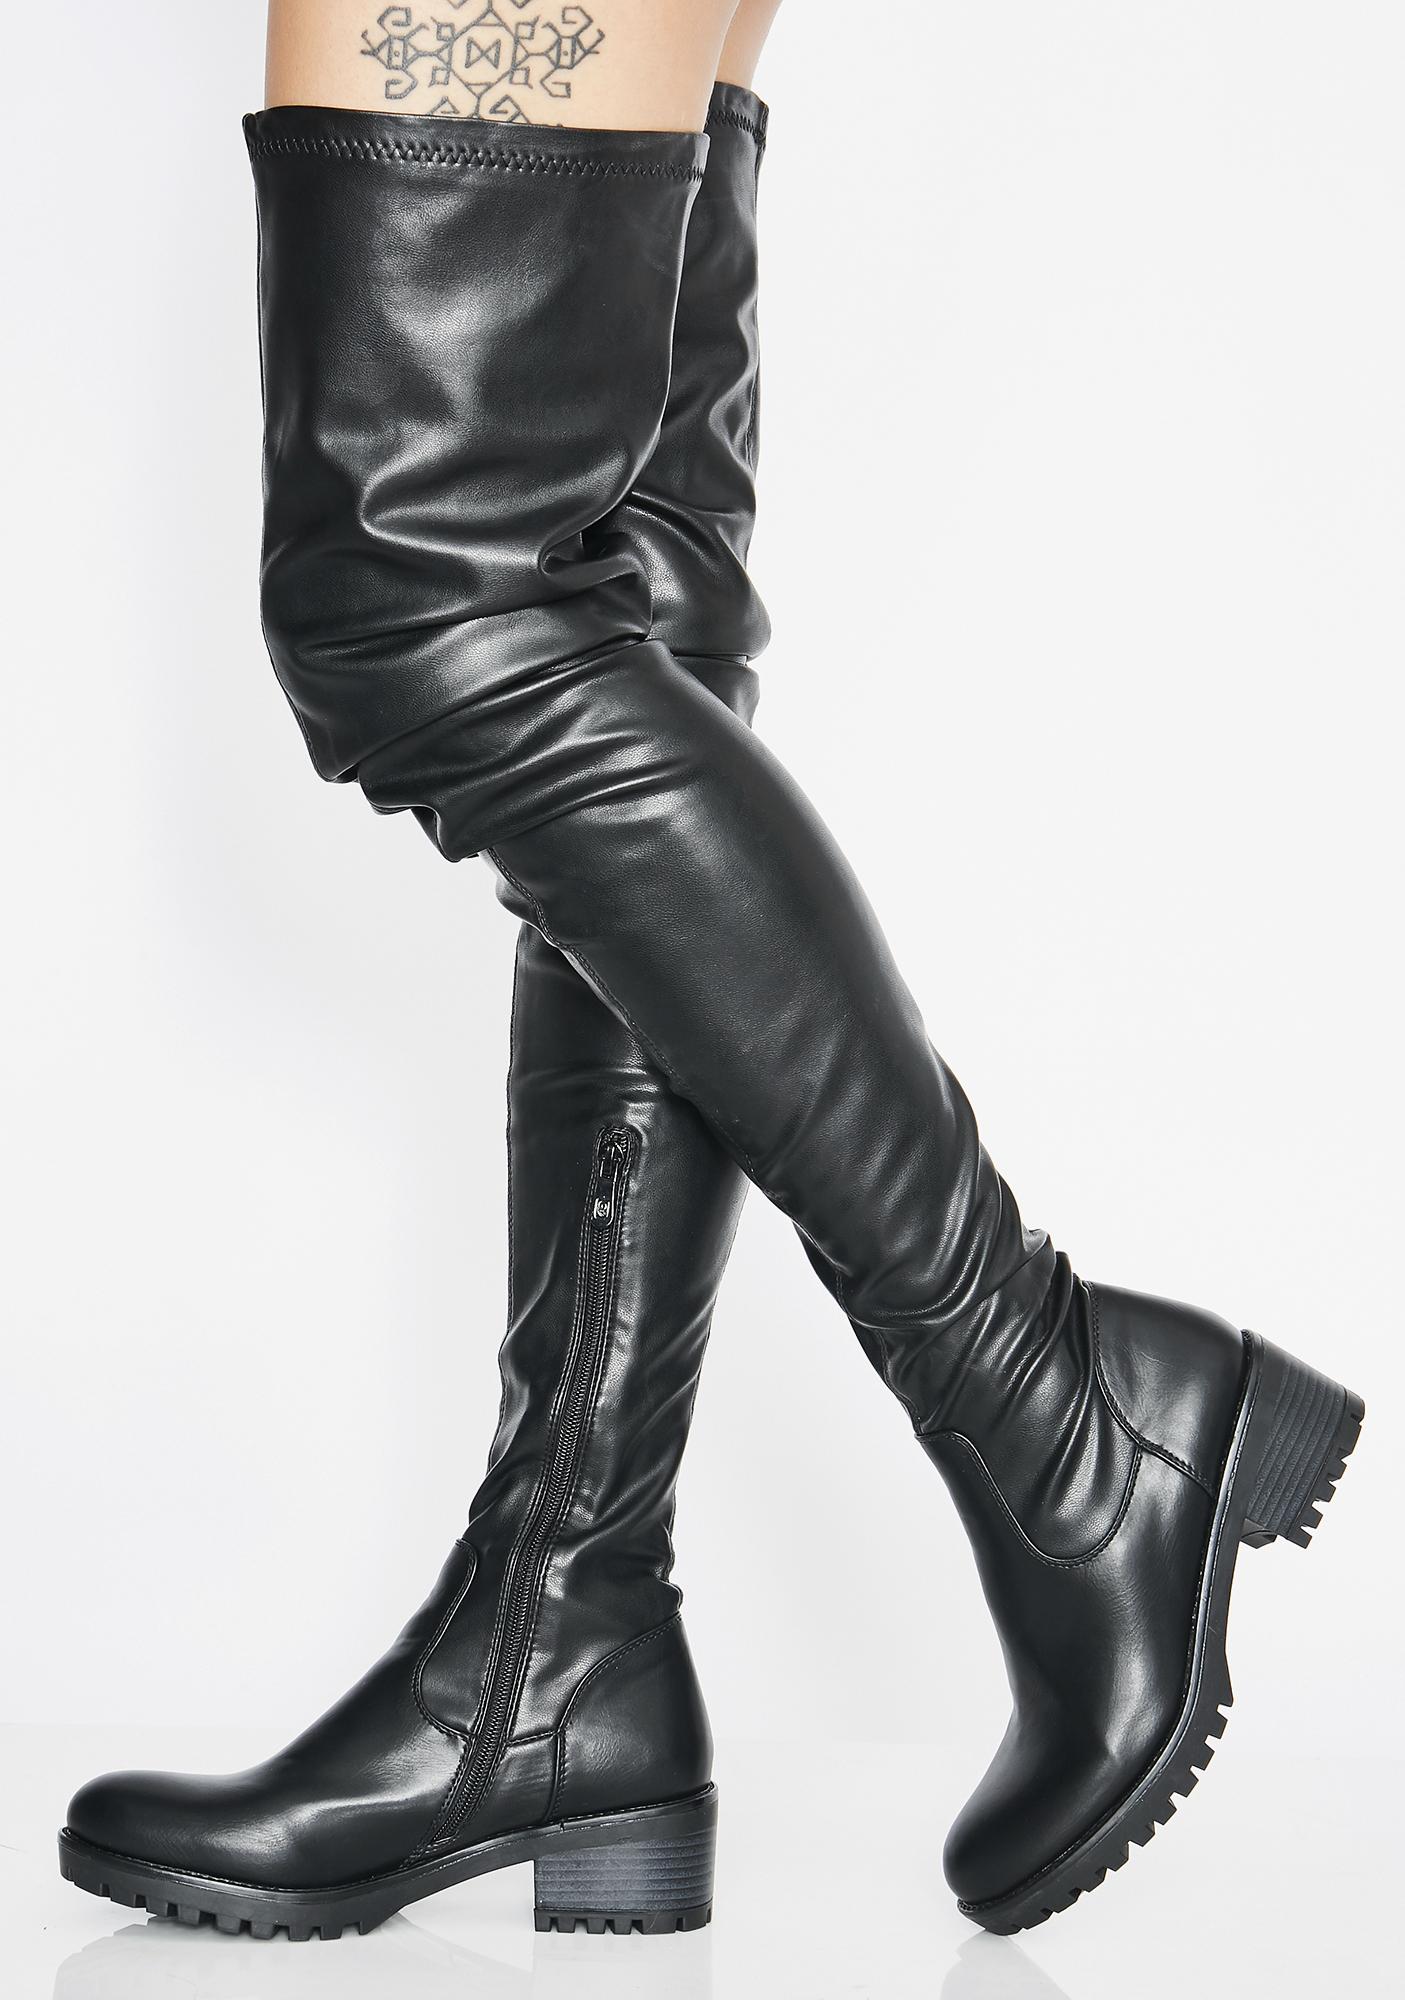 thigh high leather boots flat cheap online